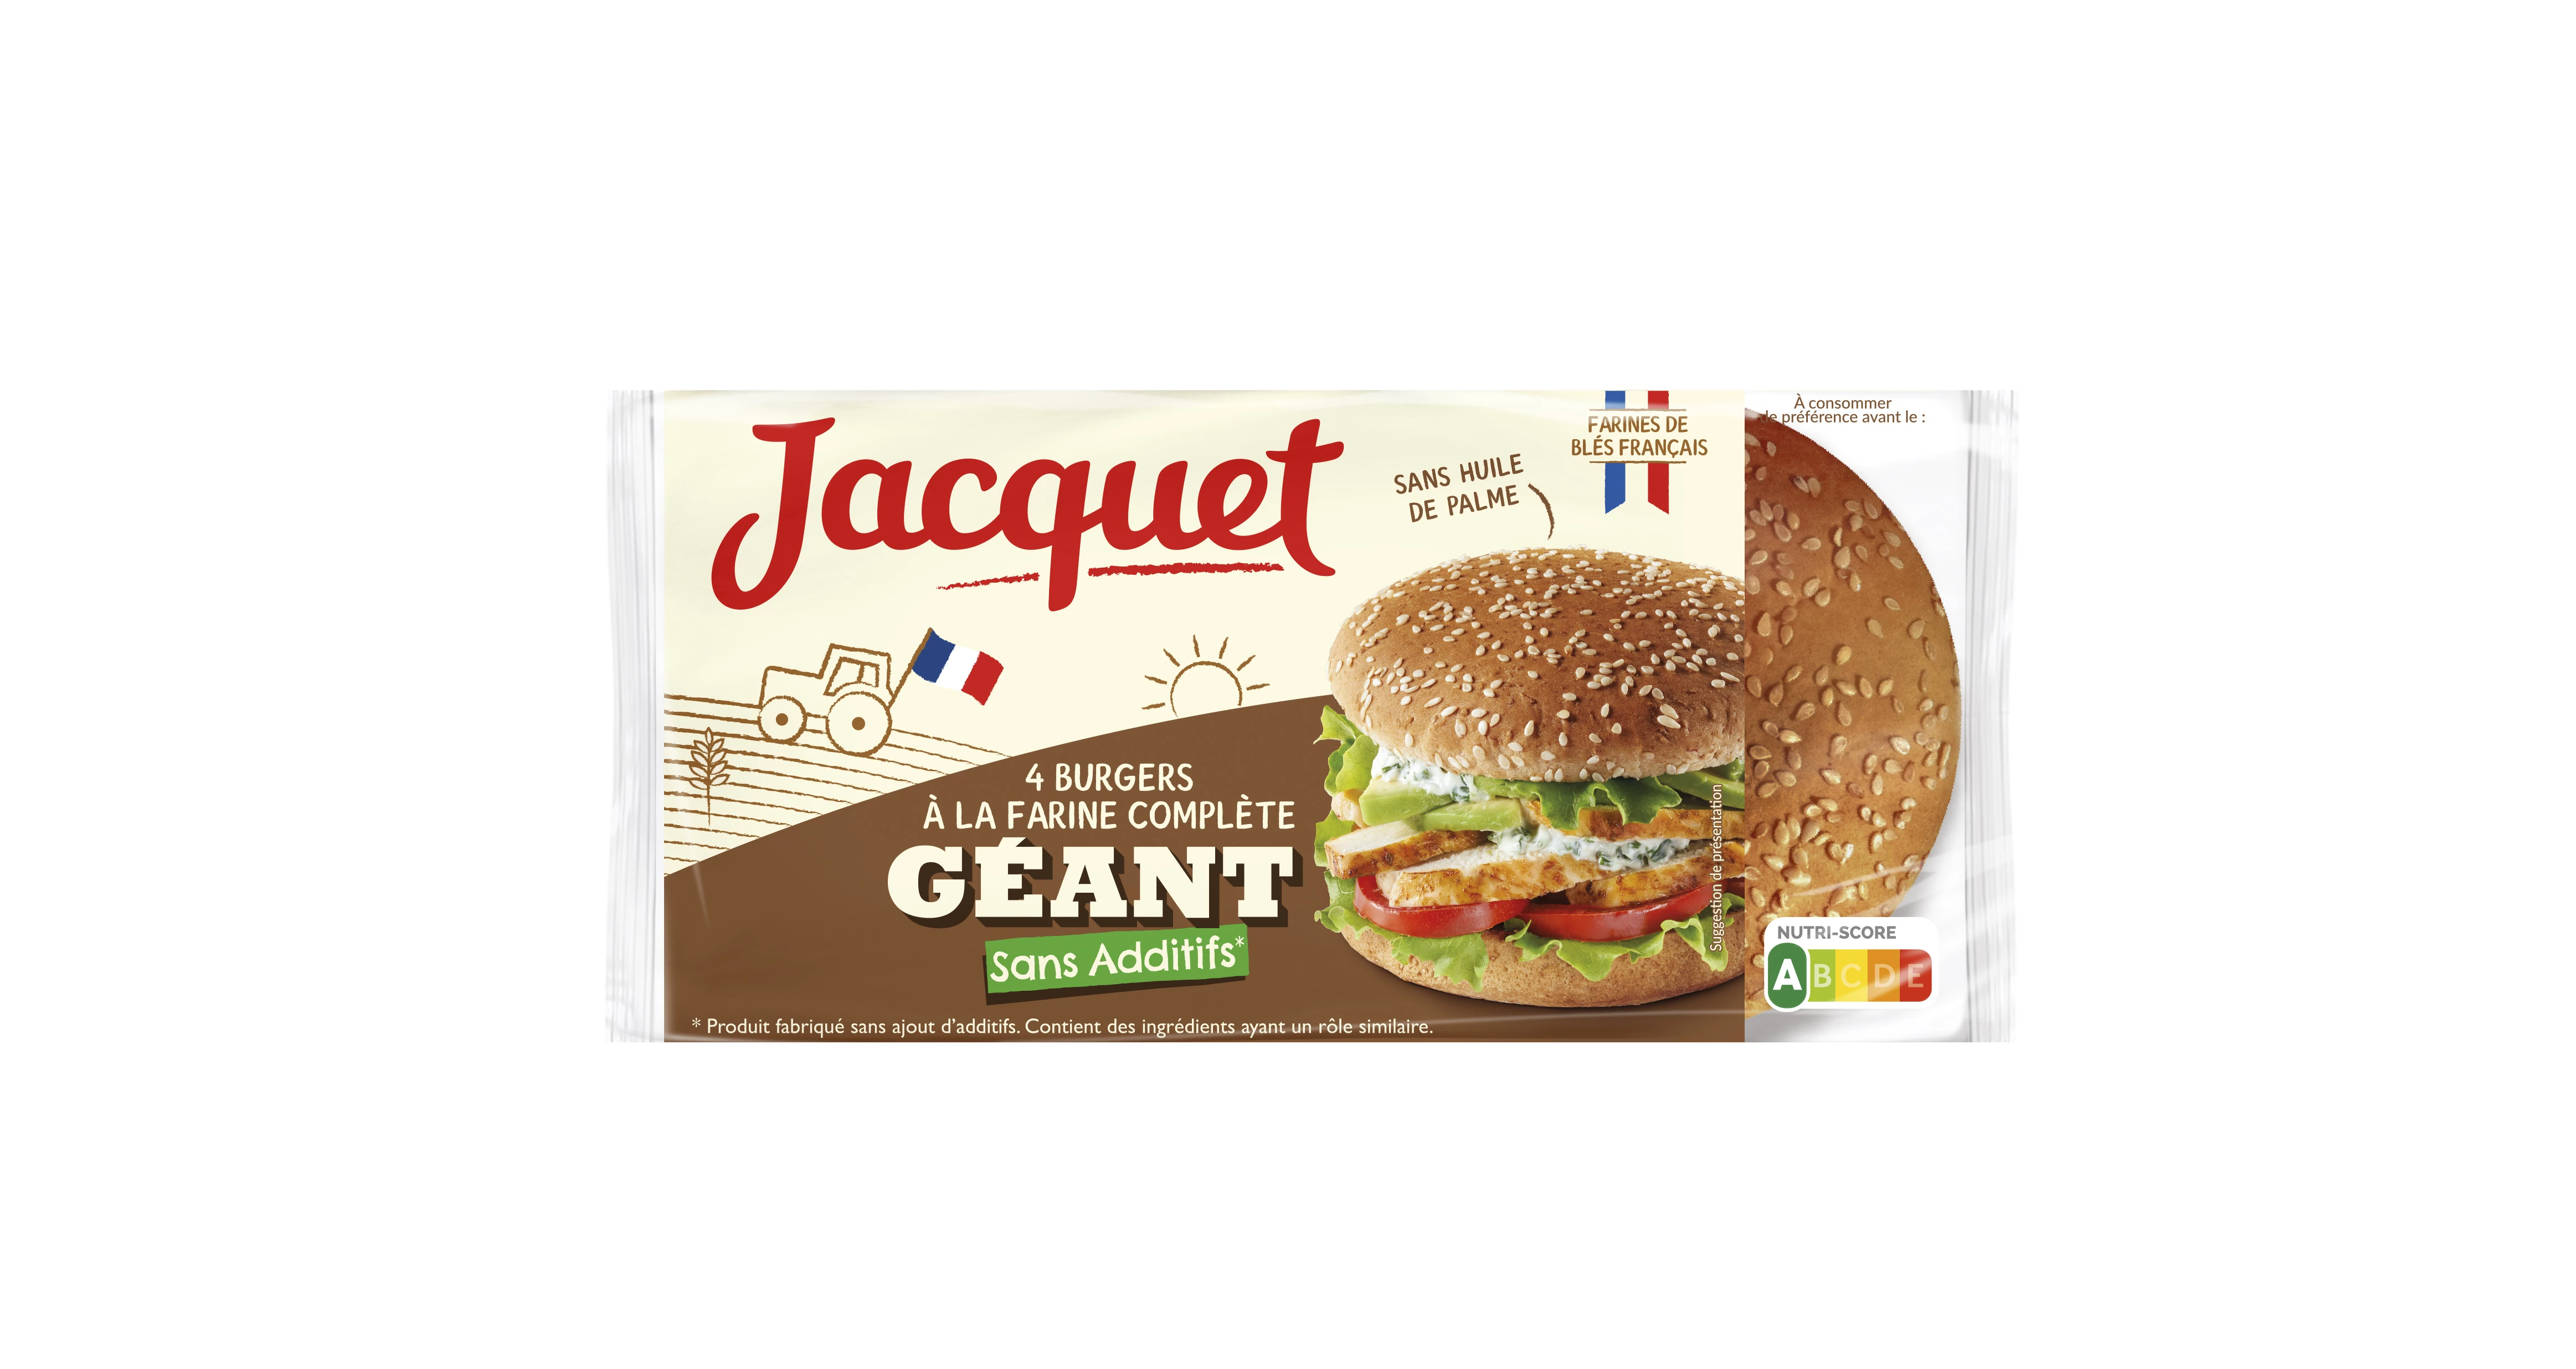 Burger Geant Complet Ss Anzeige X4